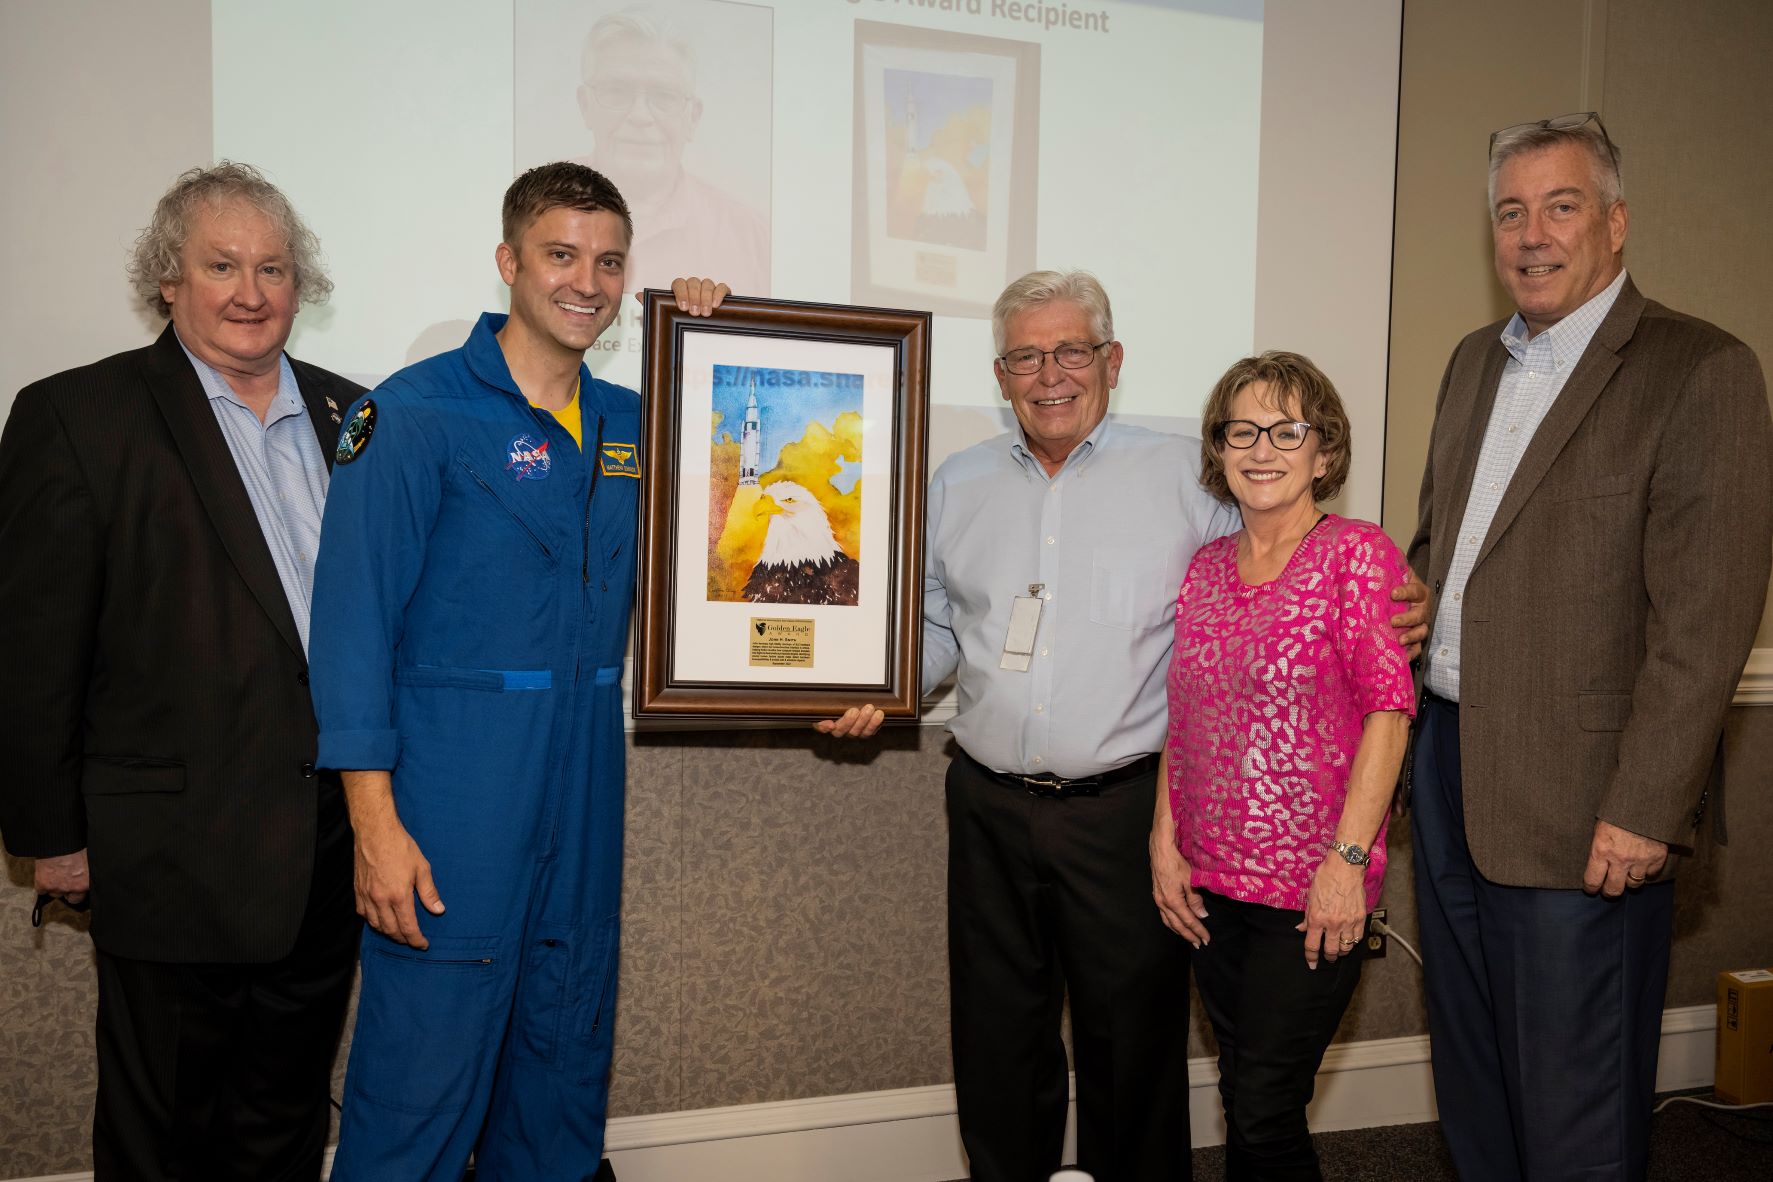 John Smith, center, receives the Golden Eagle Award during Safety Day activities Sept. 20 at NASA's Marshall Space Flight Center.